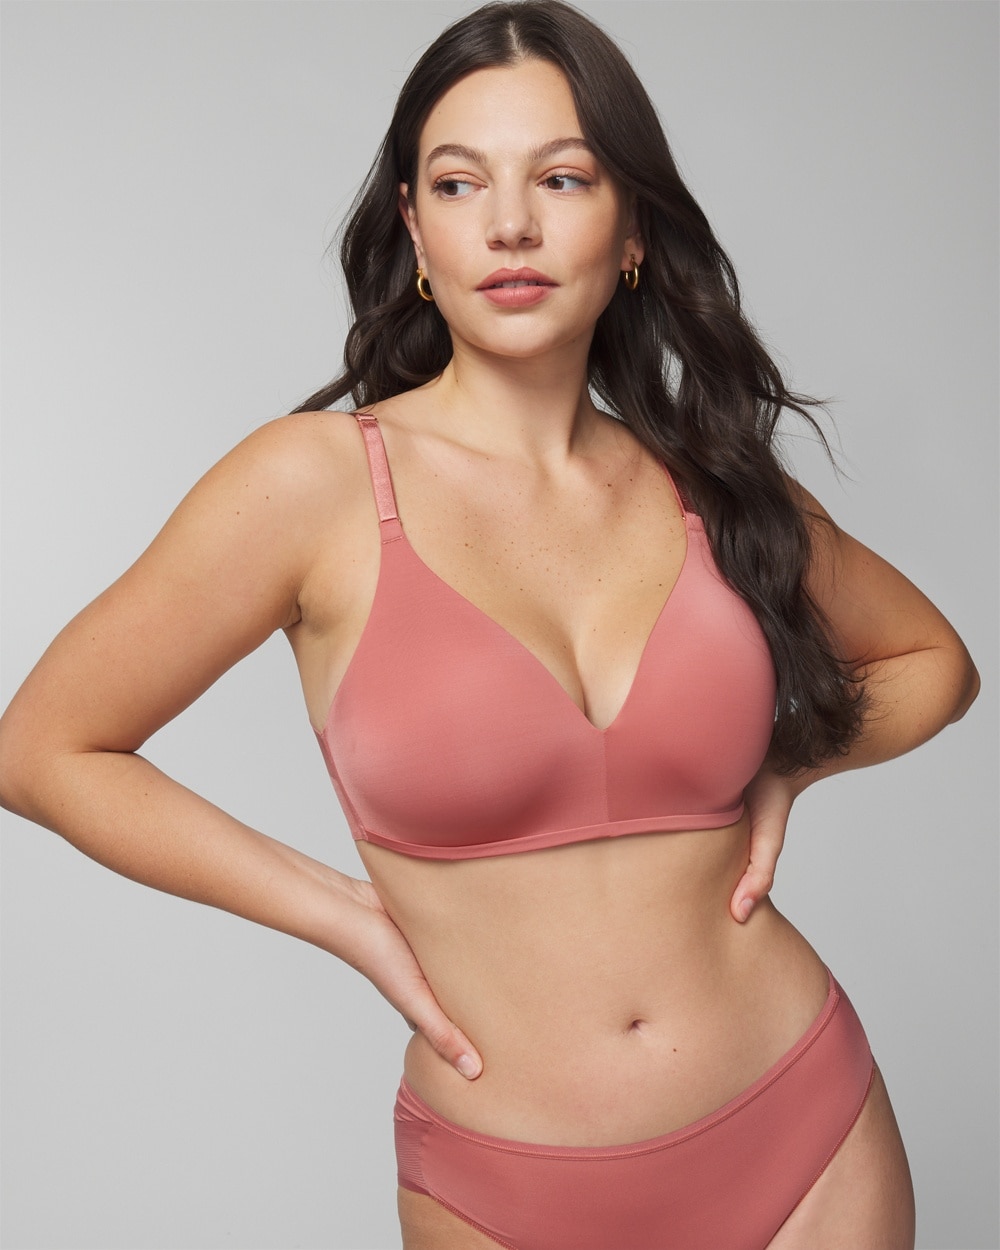 Non padded seamless full coverage bra with side support stitching for  superb support. Broad straps and band offer excellent lift. 3 pin